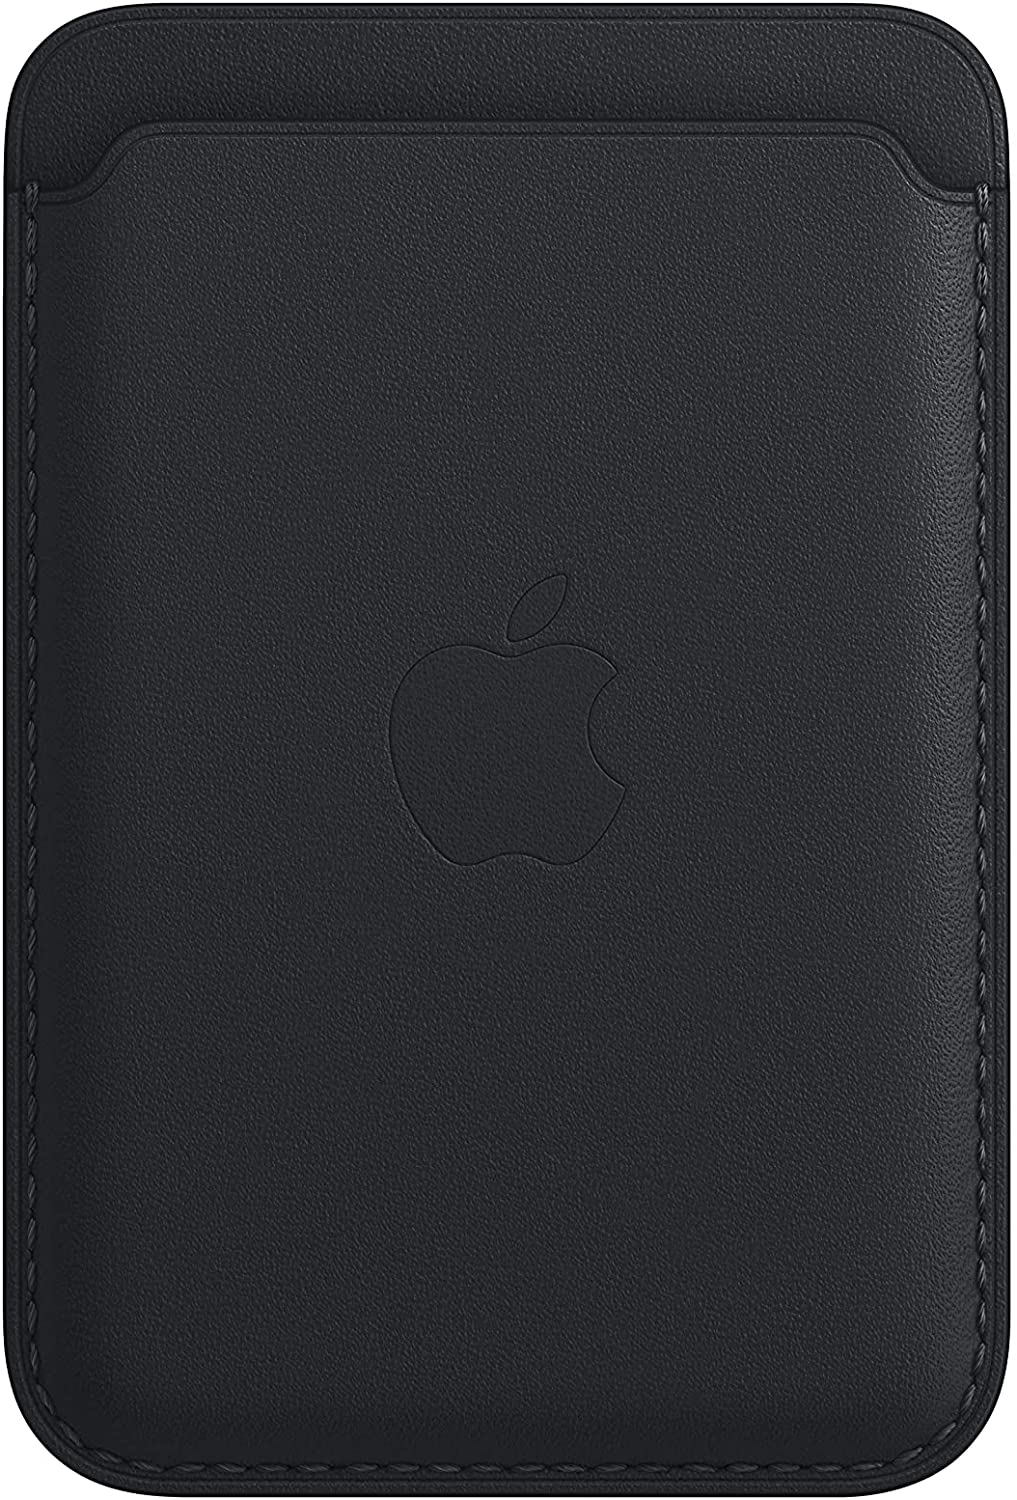 Apple iPhone Leather Wallet w/MagSafe - Midnight (New)